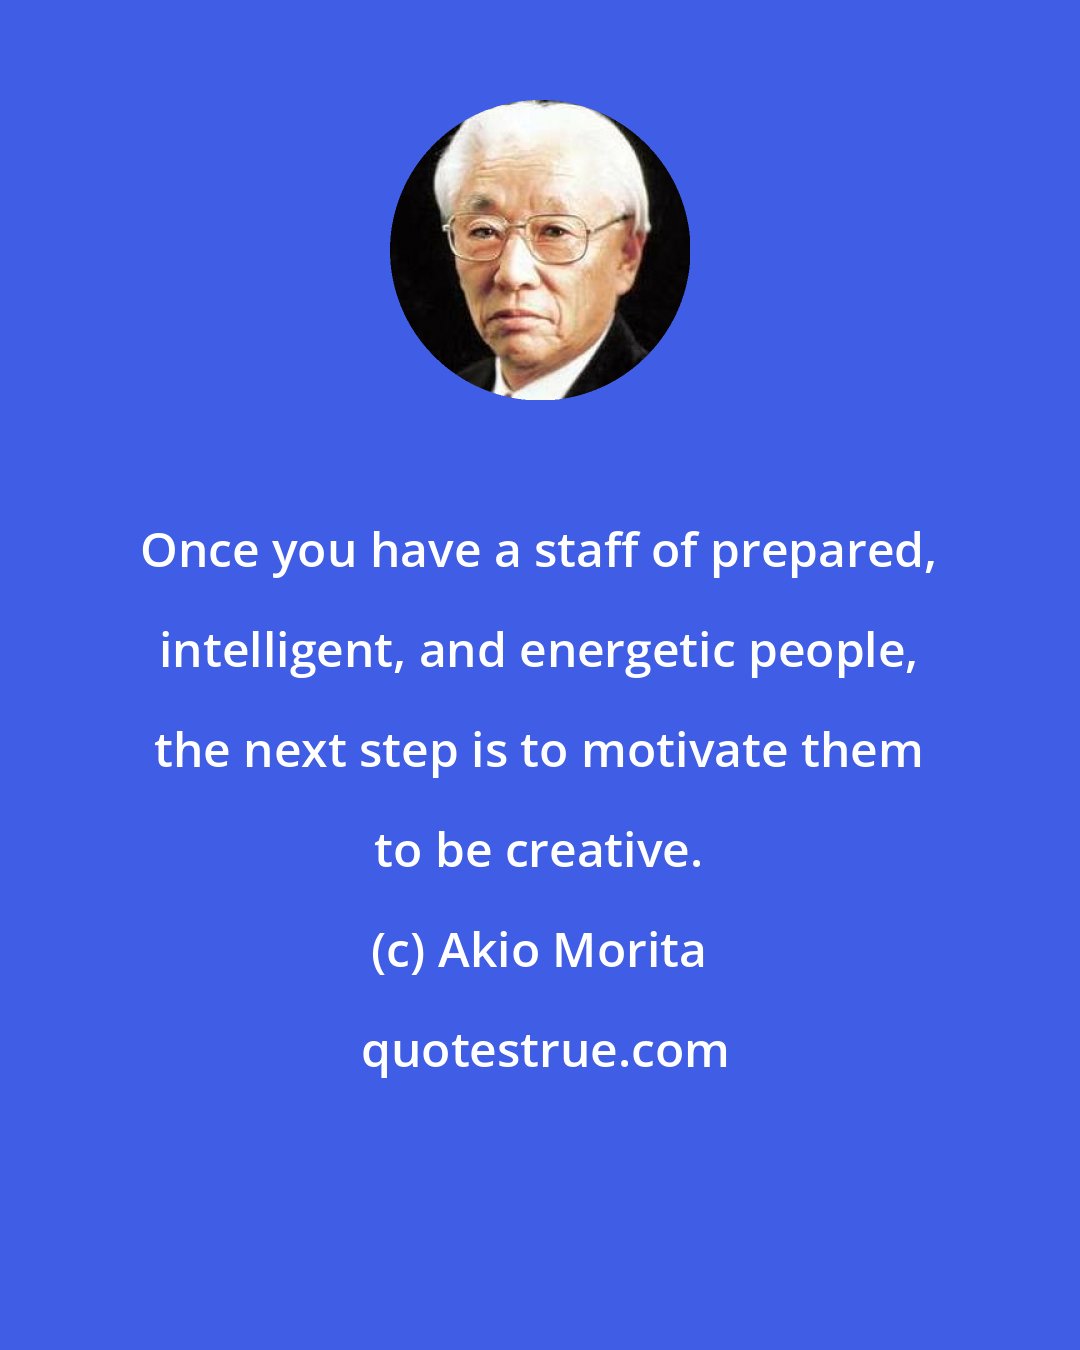 Akio Morita: Once you have a staff of prepared, intelligent, and energetic people, the next step is to motivate them to be creative.